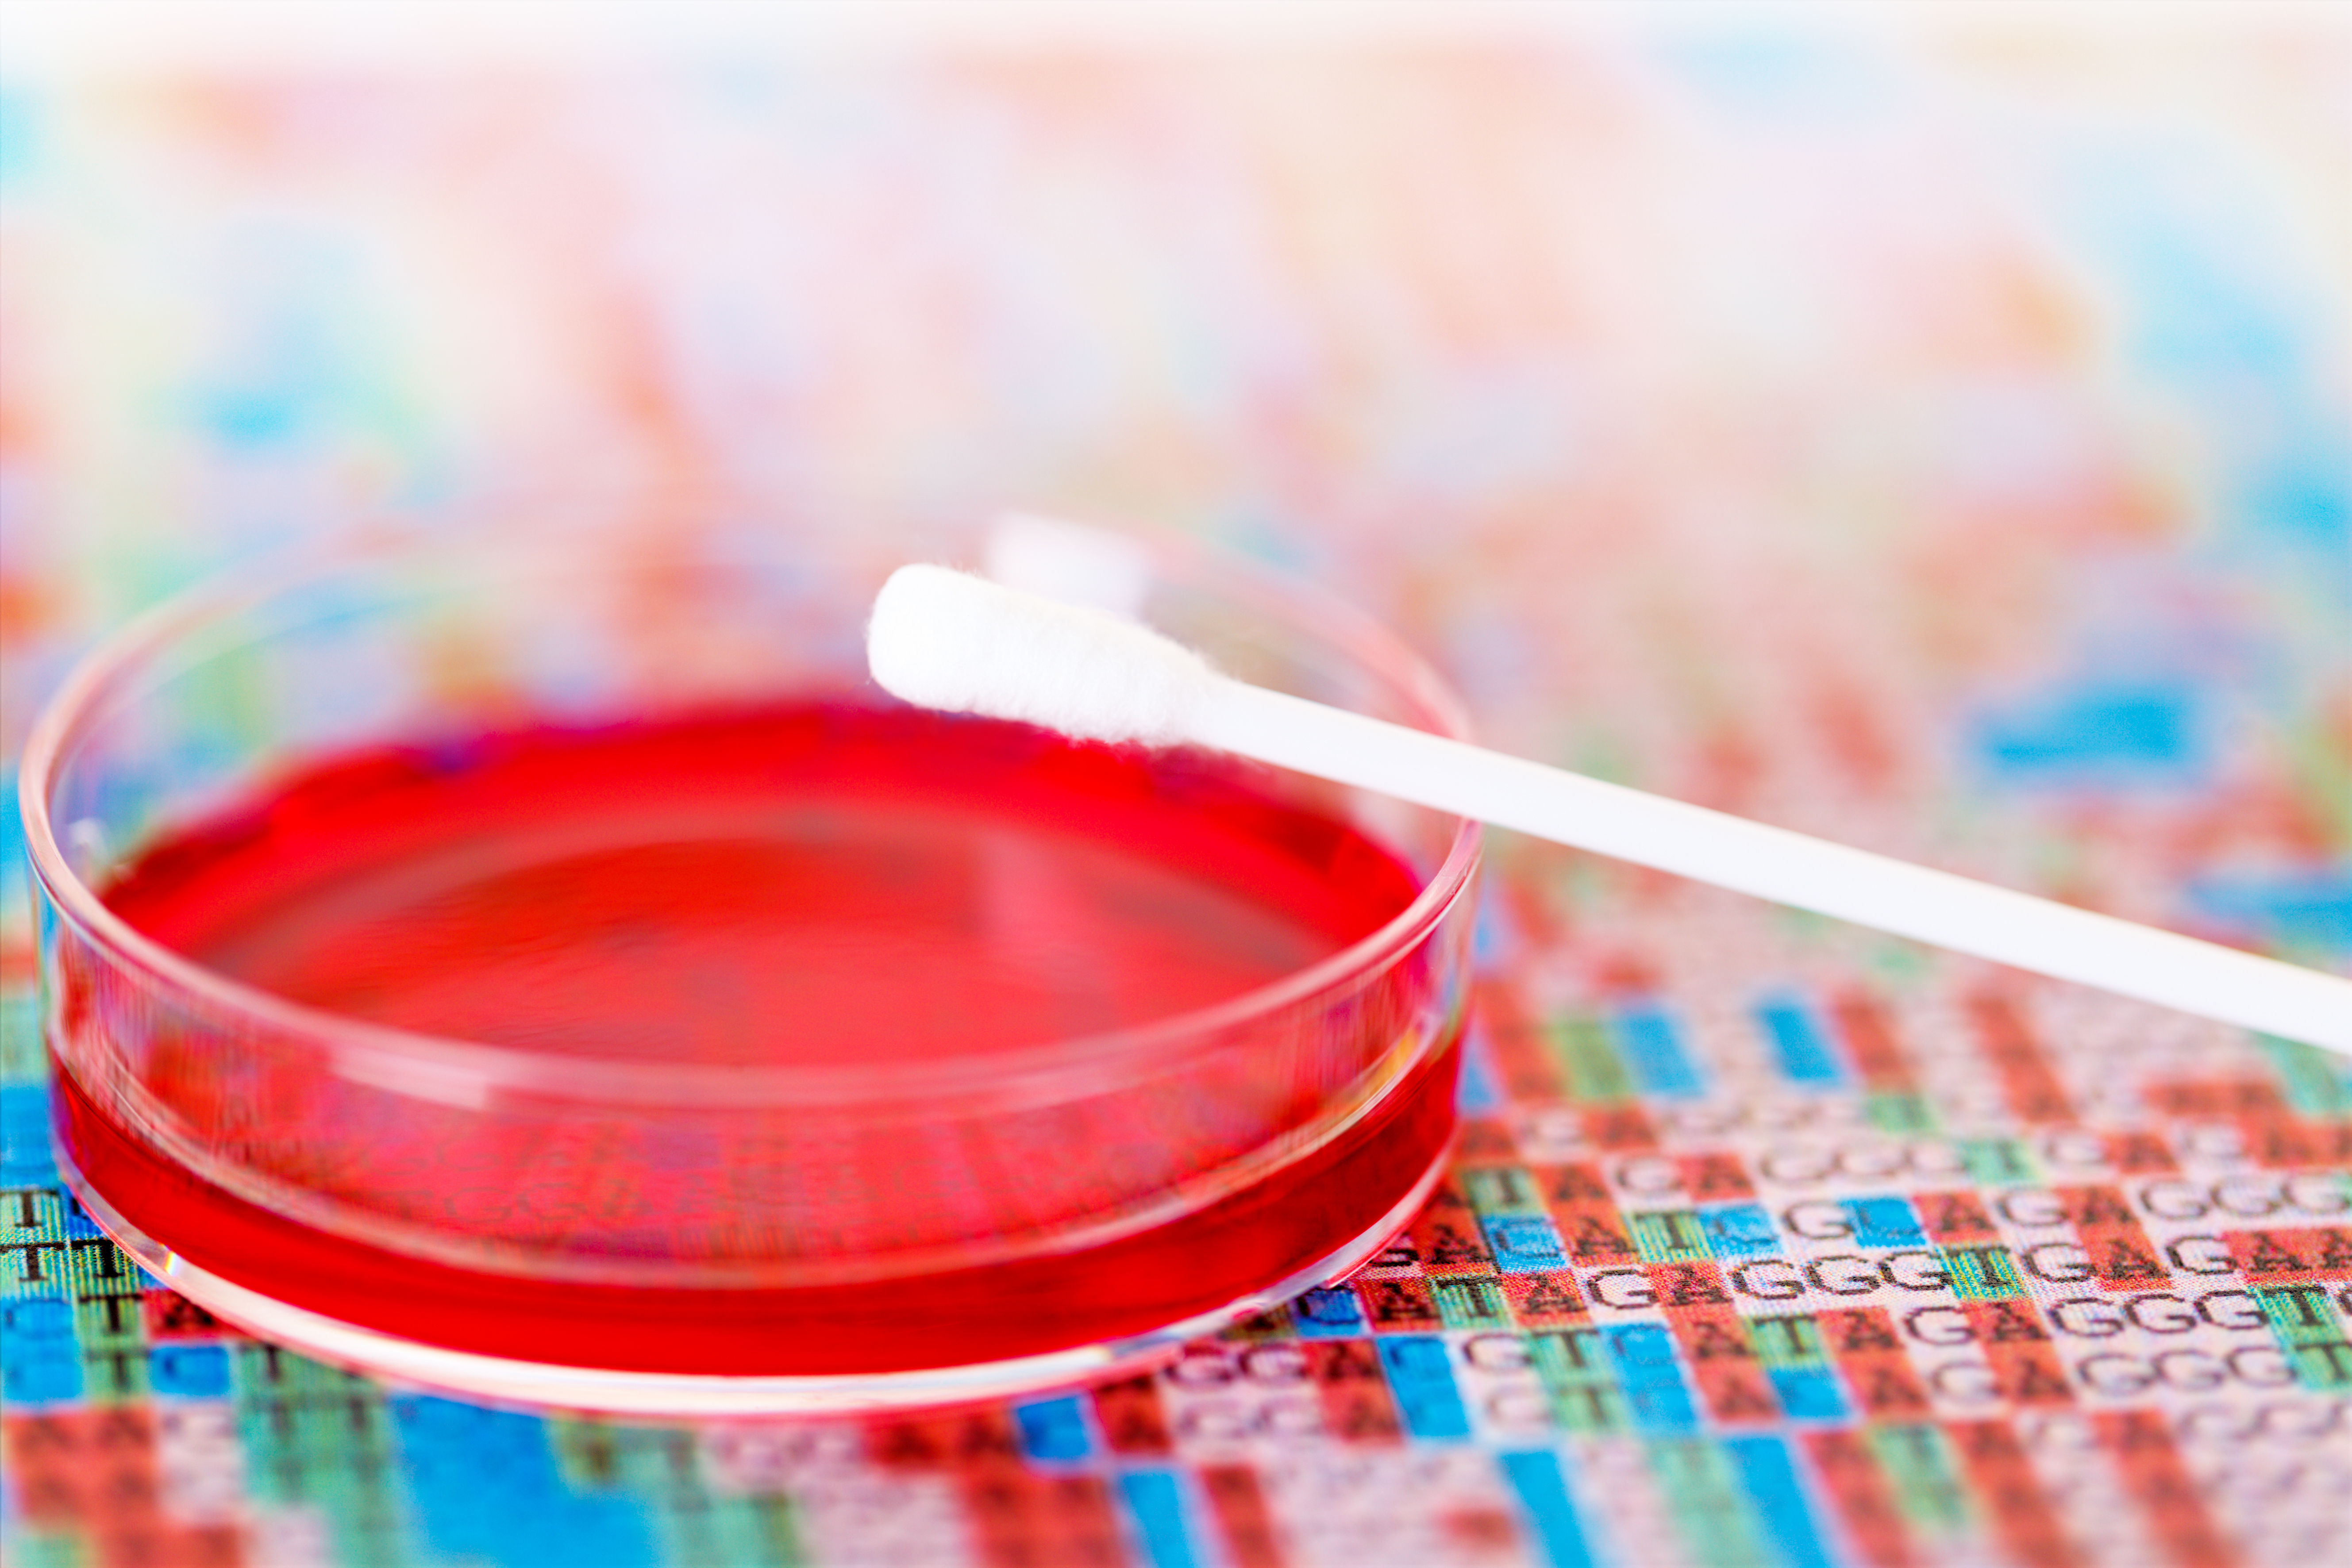 a red Petri dish with a cotton swab rests on paper with GATC printed on it in multiple colors